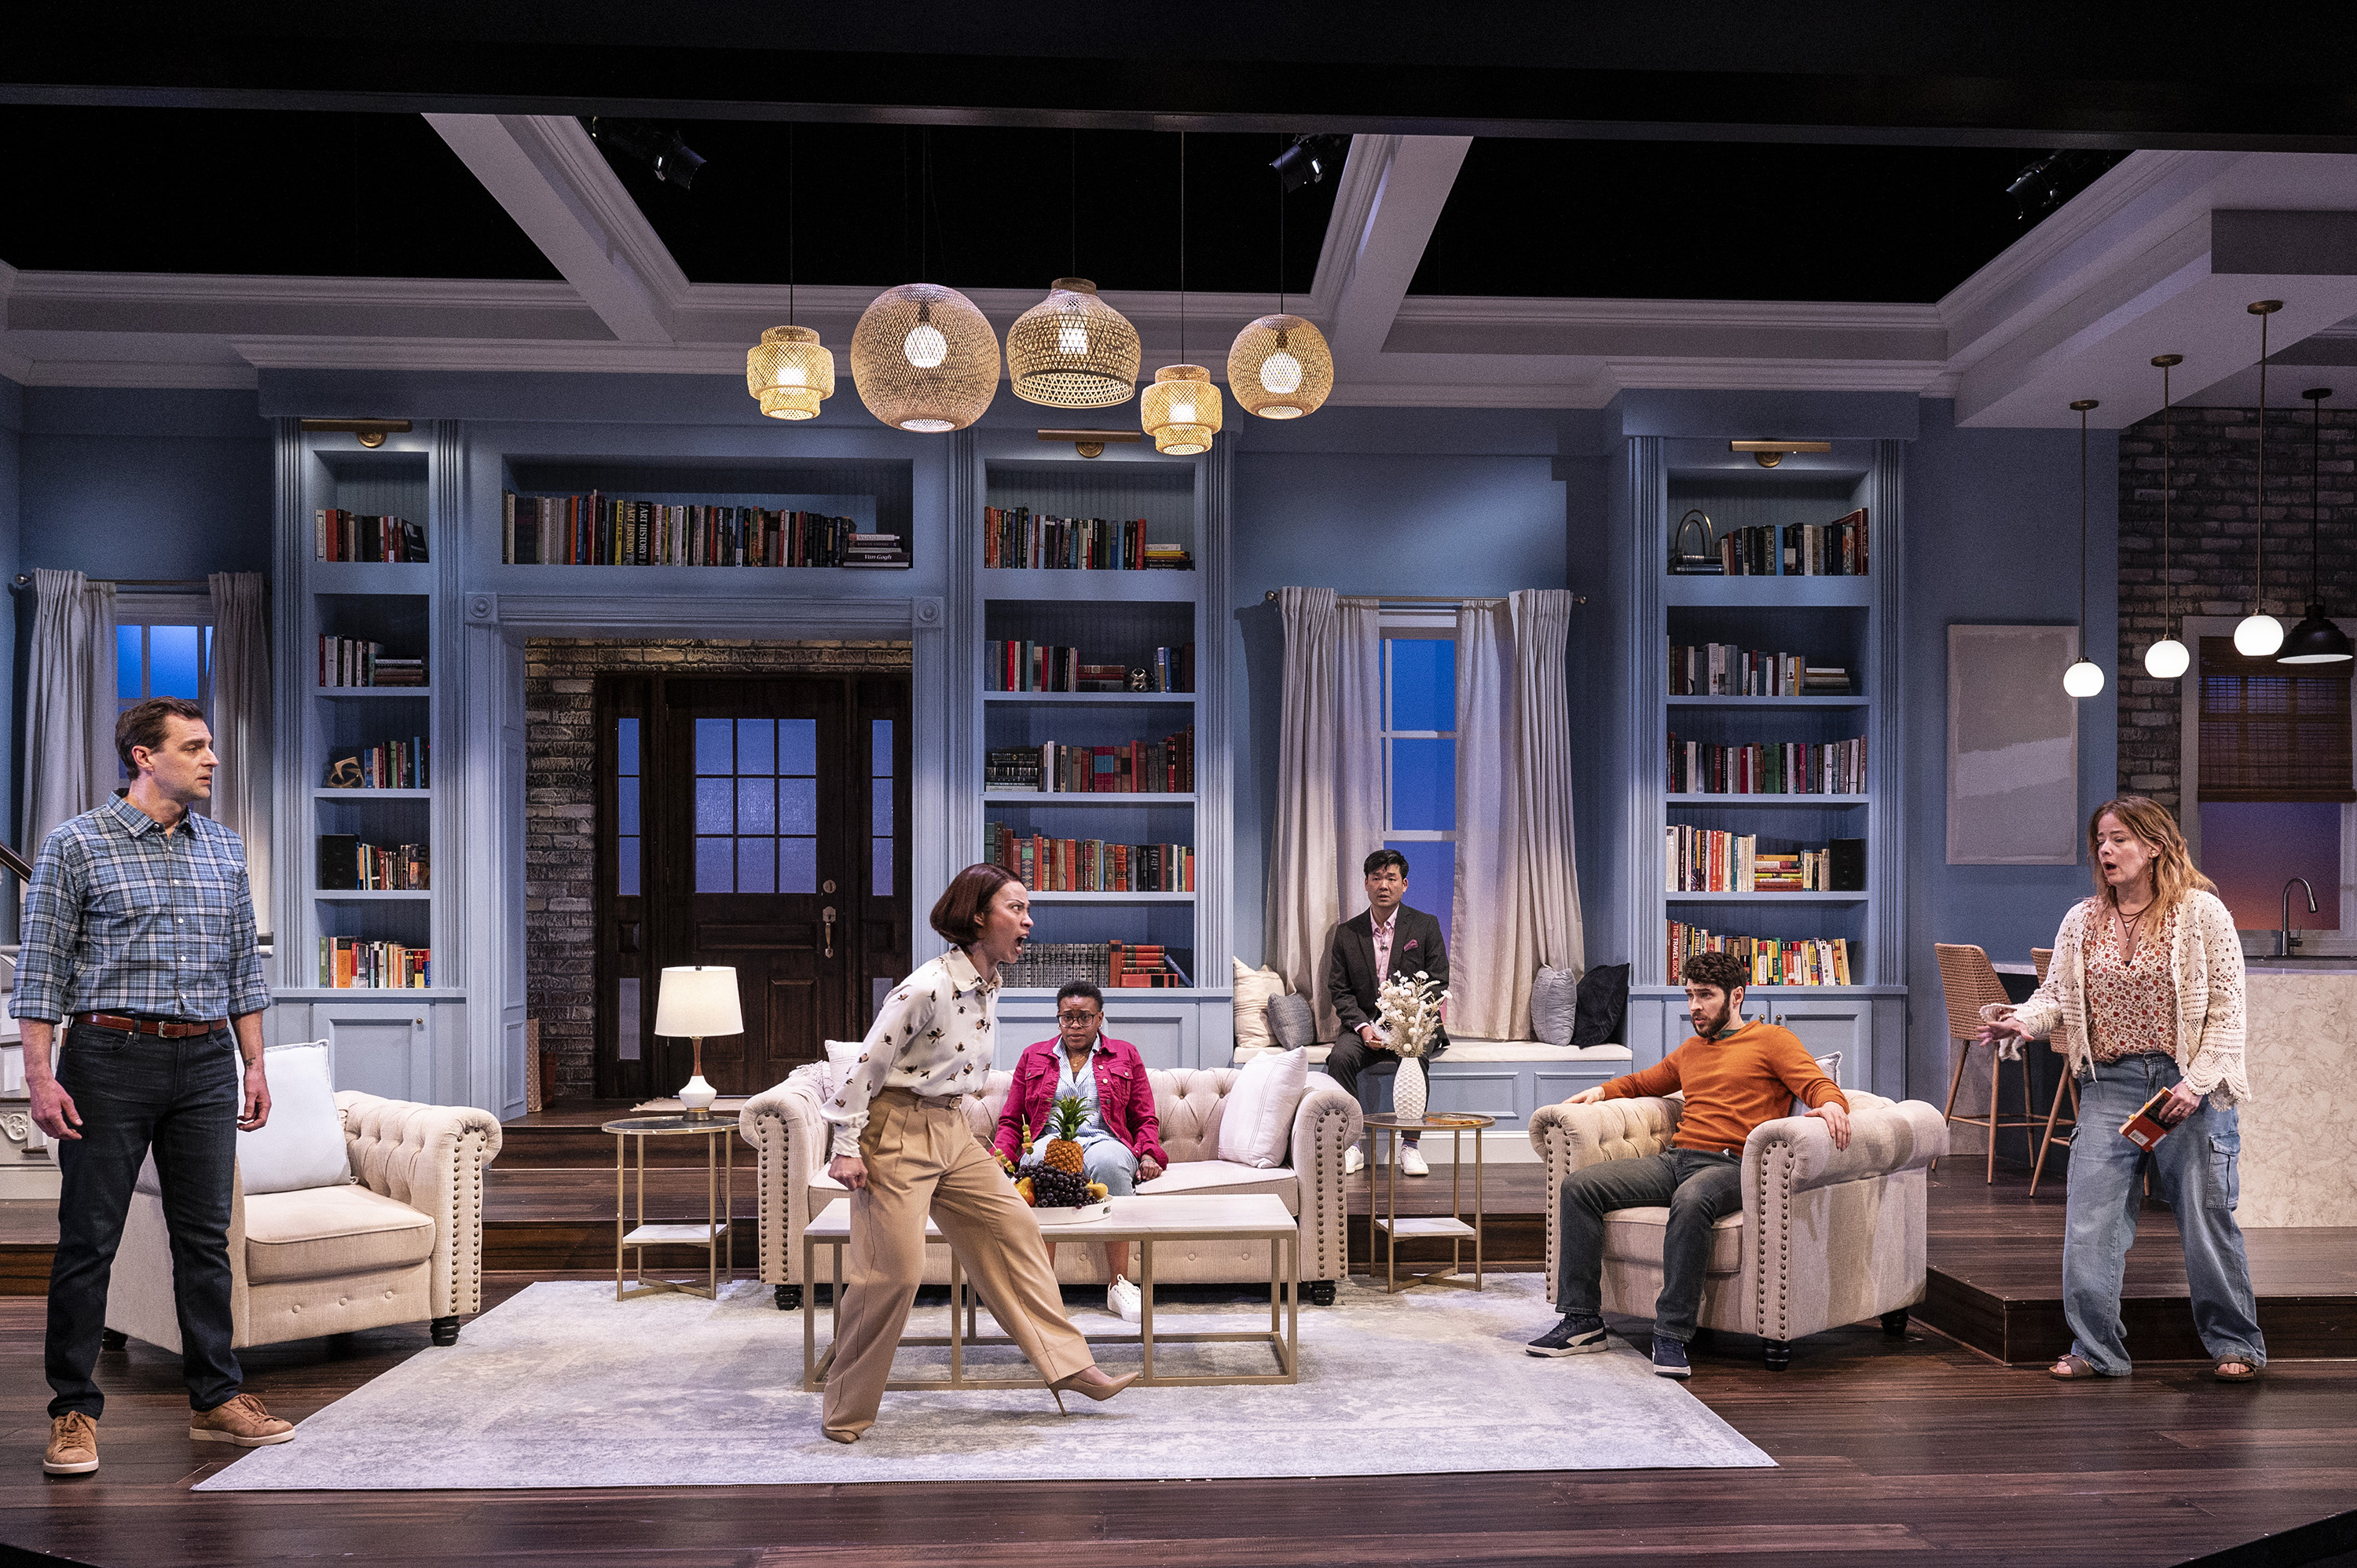 The cast of The Book Club Play Steve Polites (Robert Novum Smith), Tuyết Thị Phạm (Ana) , Majenta Thomas (Lily Louise Jackson) , Tony Nam (William Lee Nothnagel) , Zack Powell (Alex) Megan Anderson (Jennifer McClintock). The Book Club Play is written by Karen Zacharias and directed by Laura Kepley is onstage at Everyman now through April 14. (Teresa Castracane Photography/Handout)